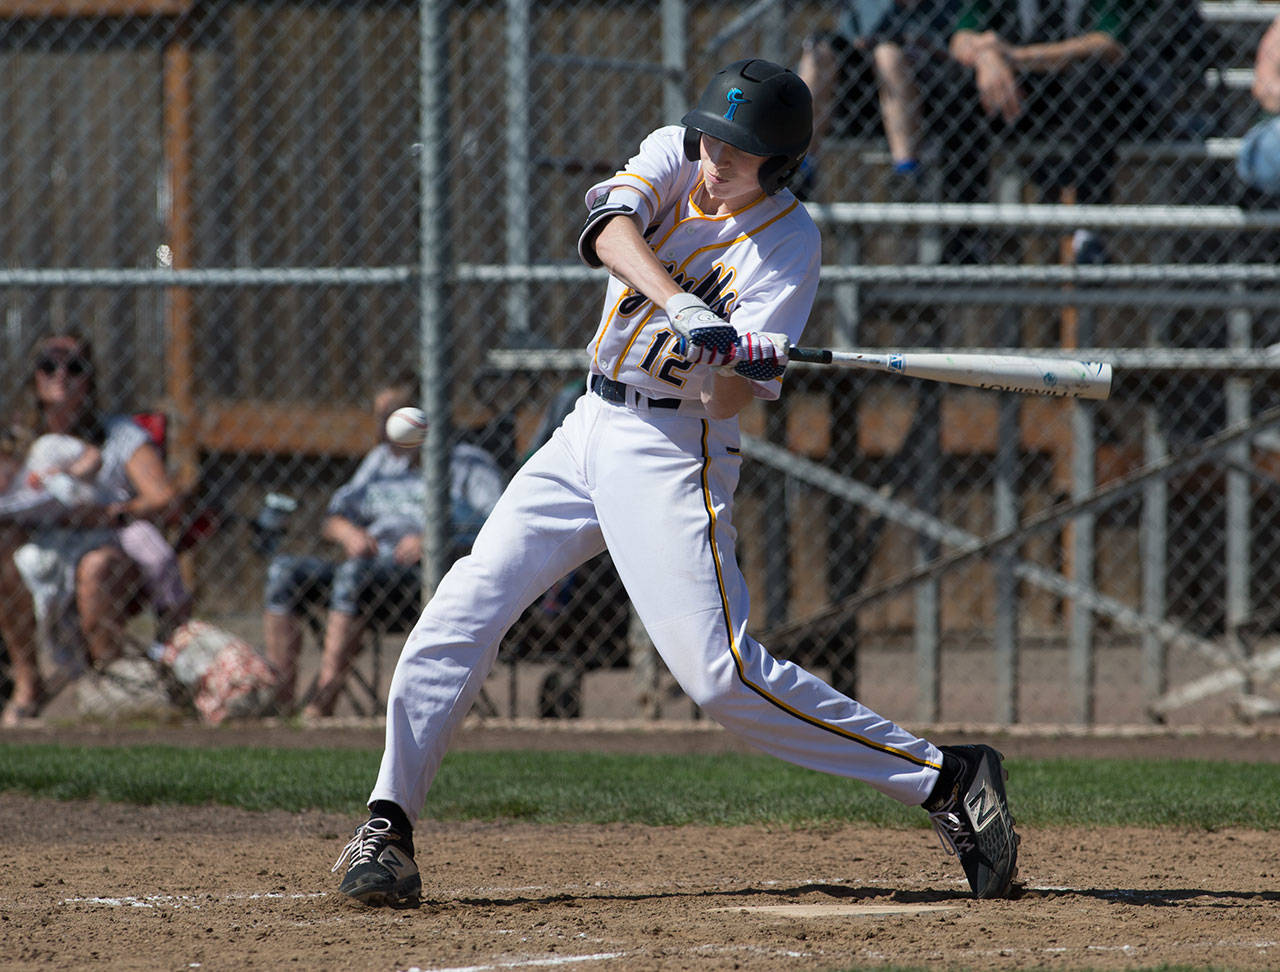 Everett’s Casen Taggart drives home a sixth-inning run to put the Seagulls on the board. (Andy Bronson / The Herald)